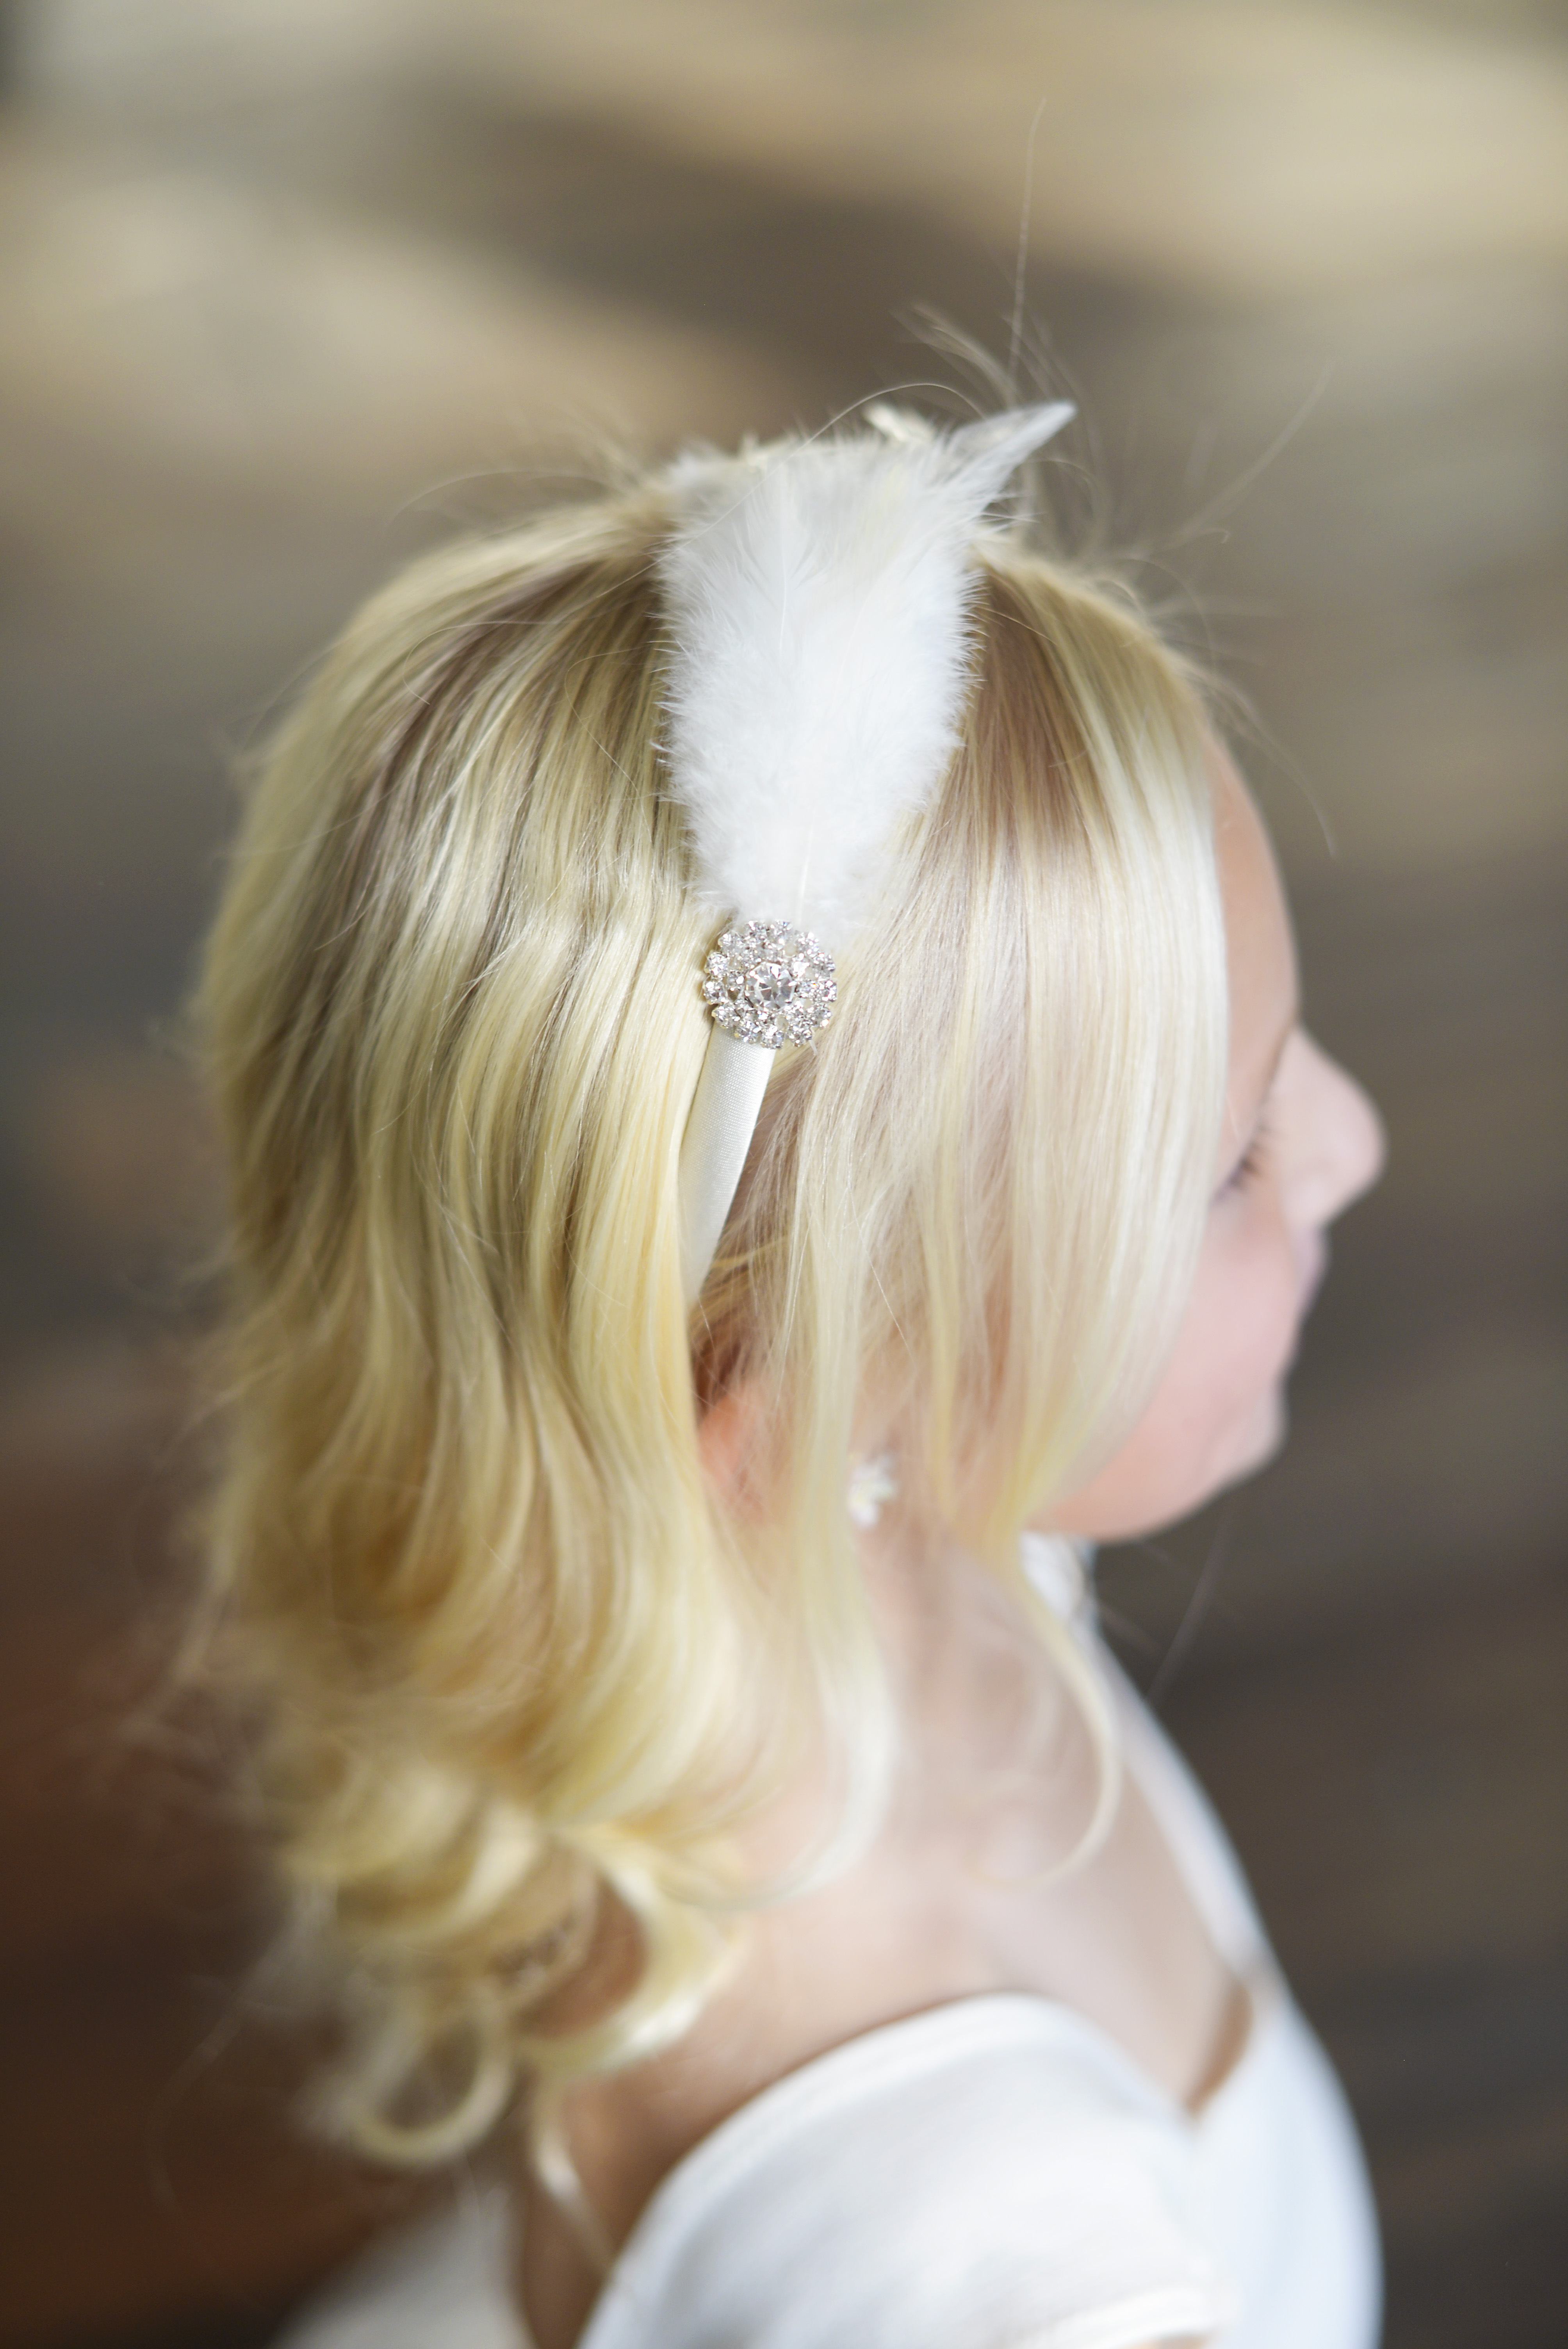 A photo of a flower girl wearing an ivory or white satin headband with a feather and diamante trim